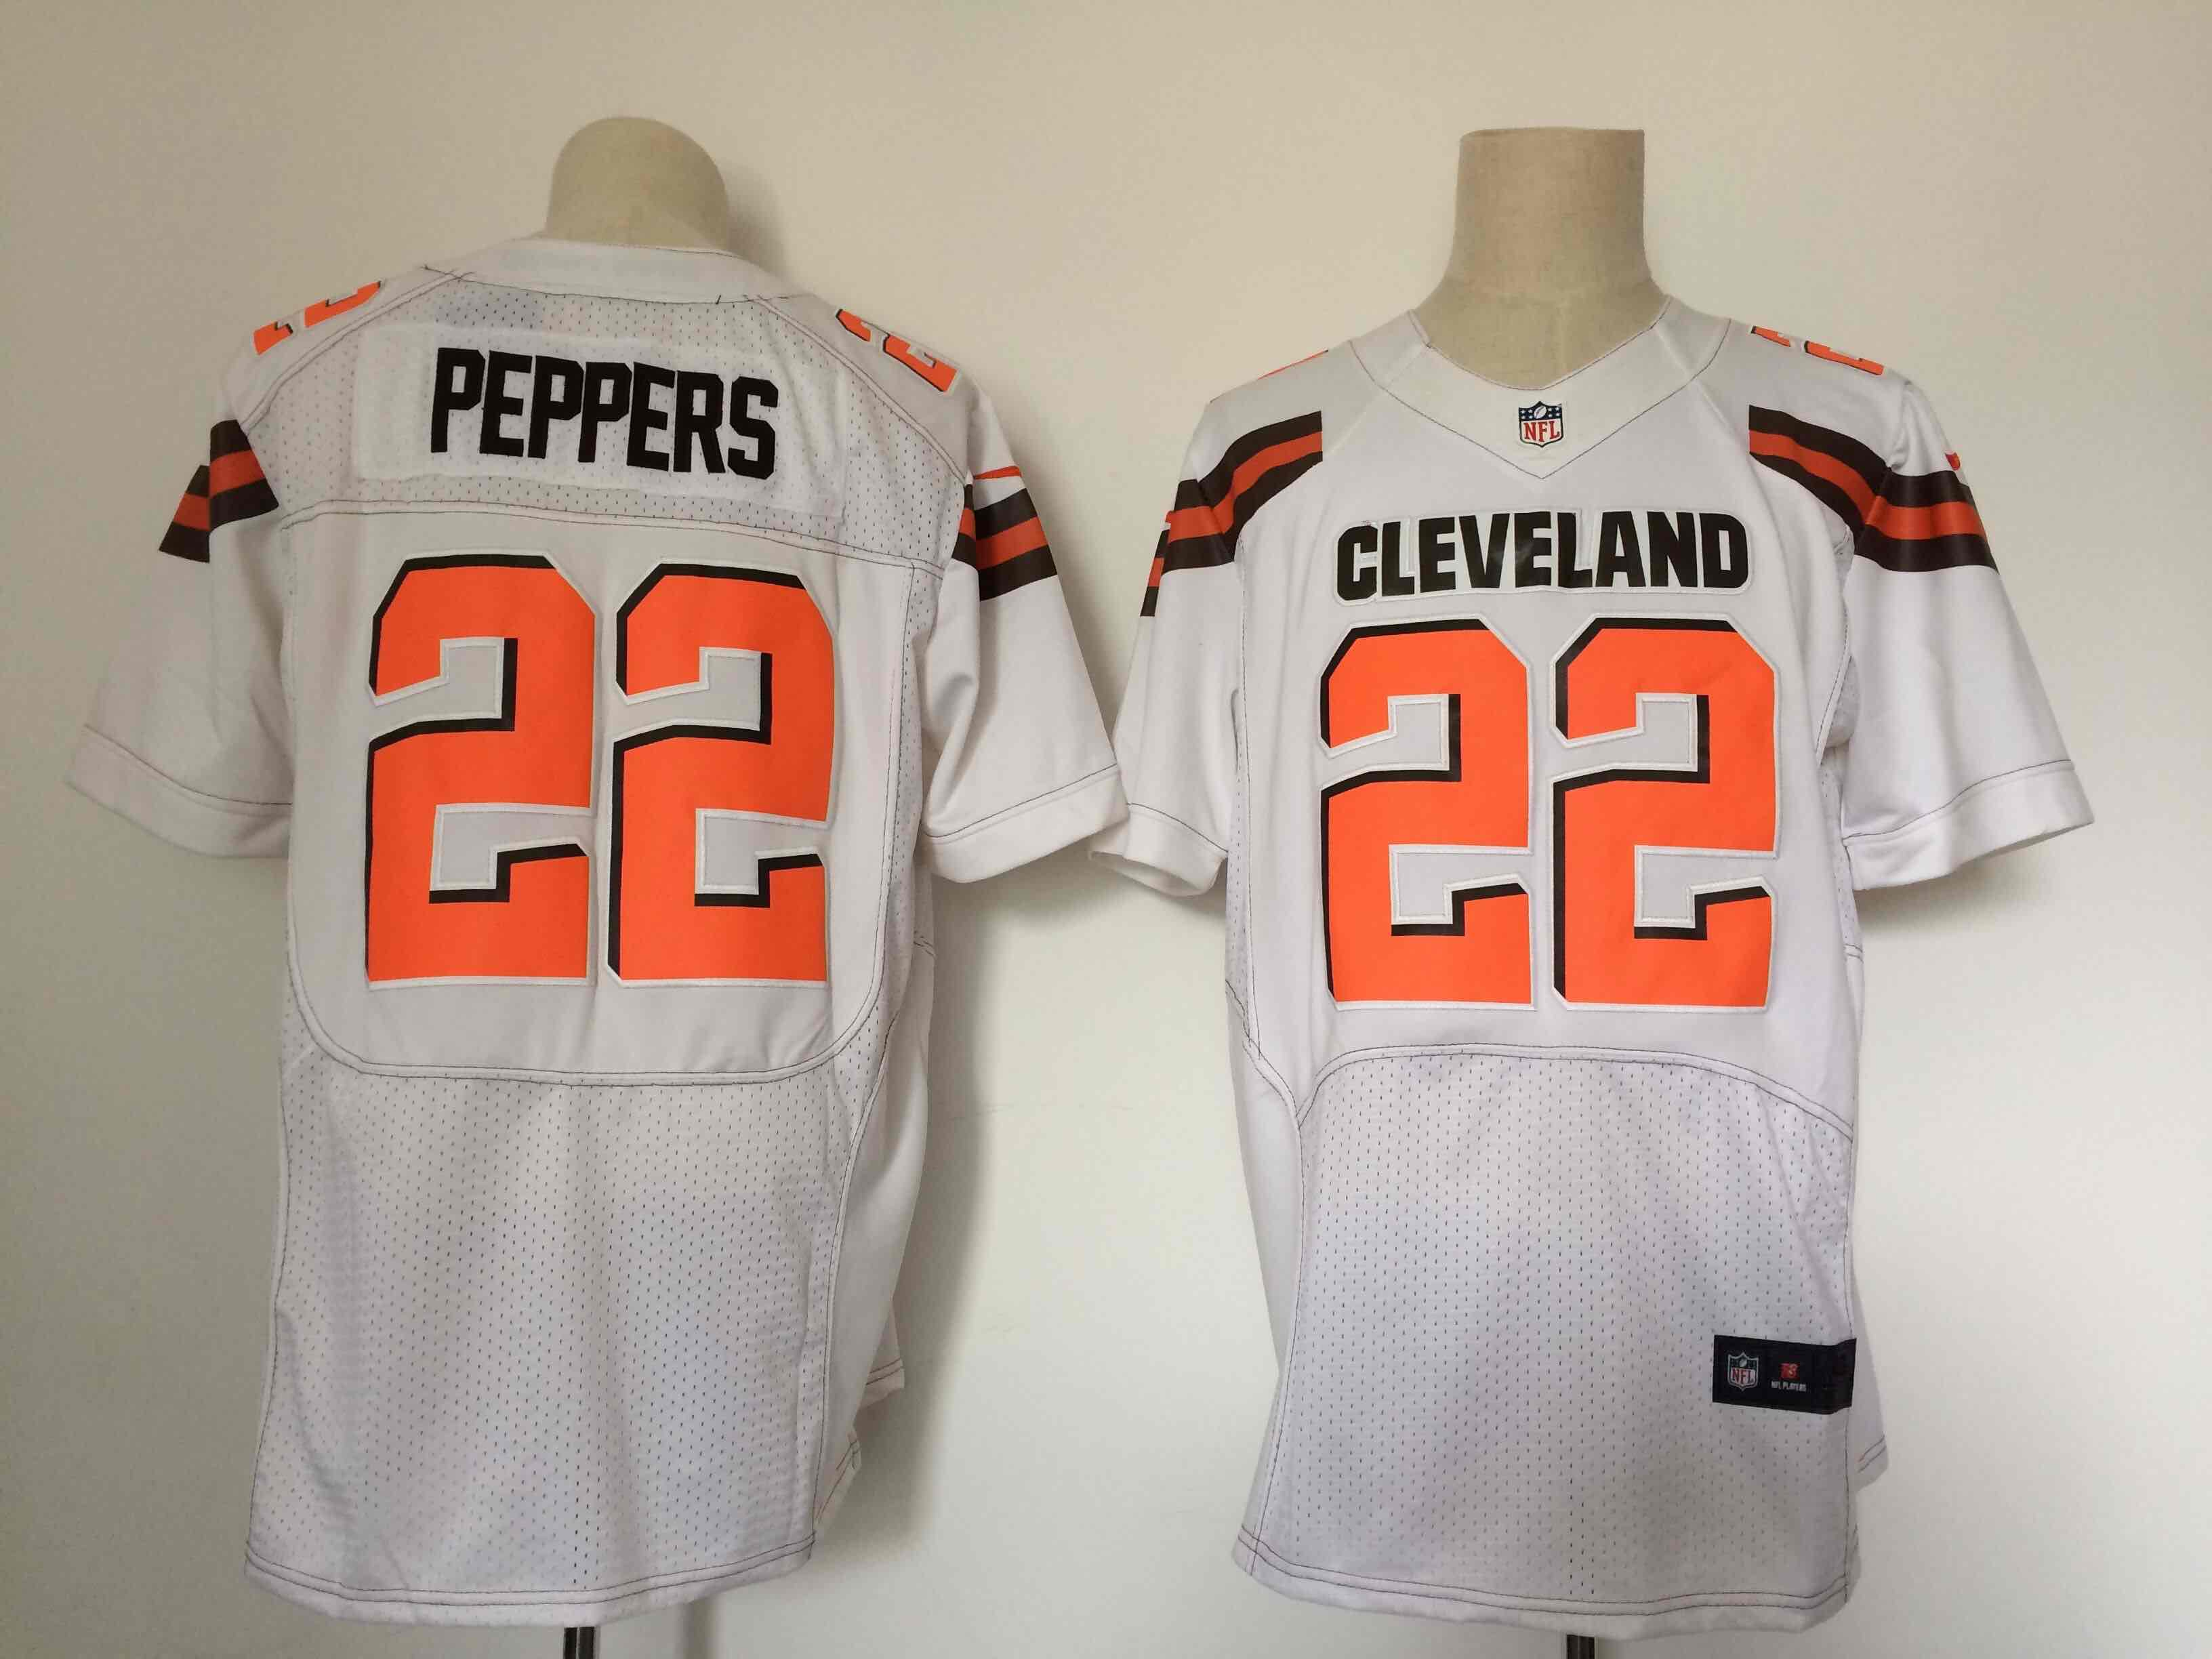 NFL Cleveland Browns #22 Peppers White Elite Jersey